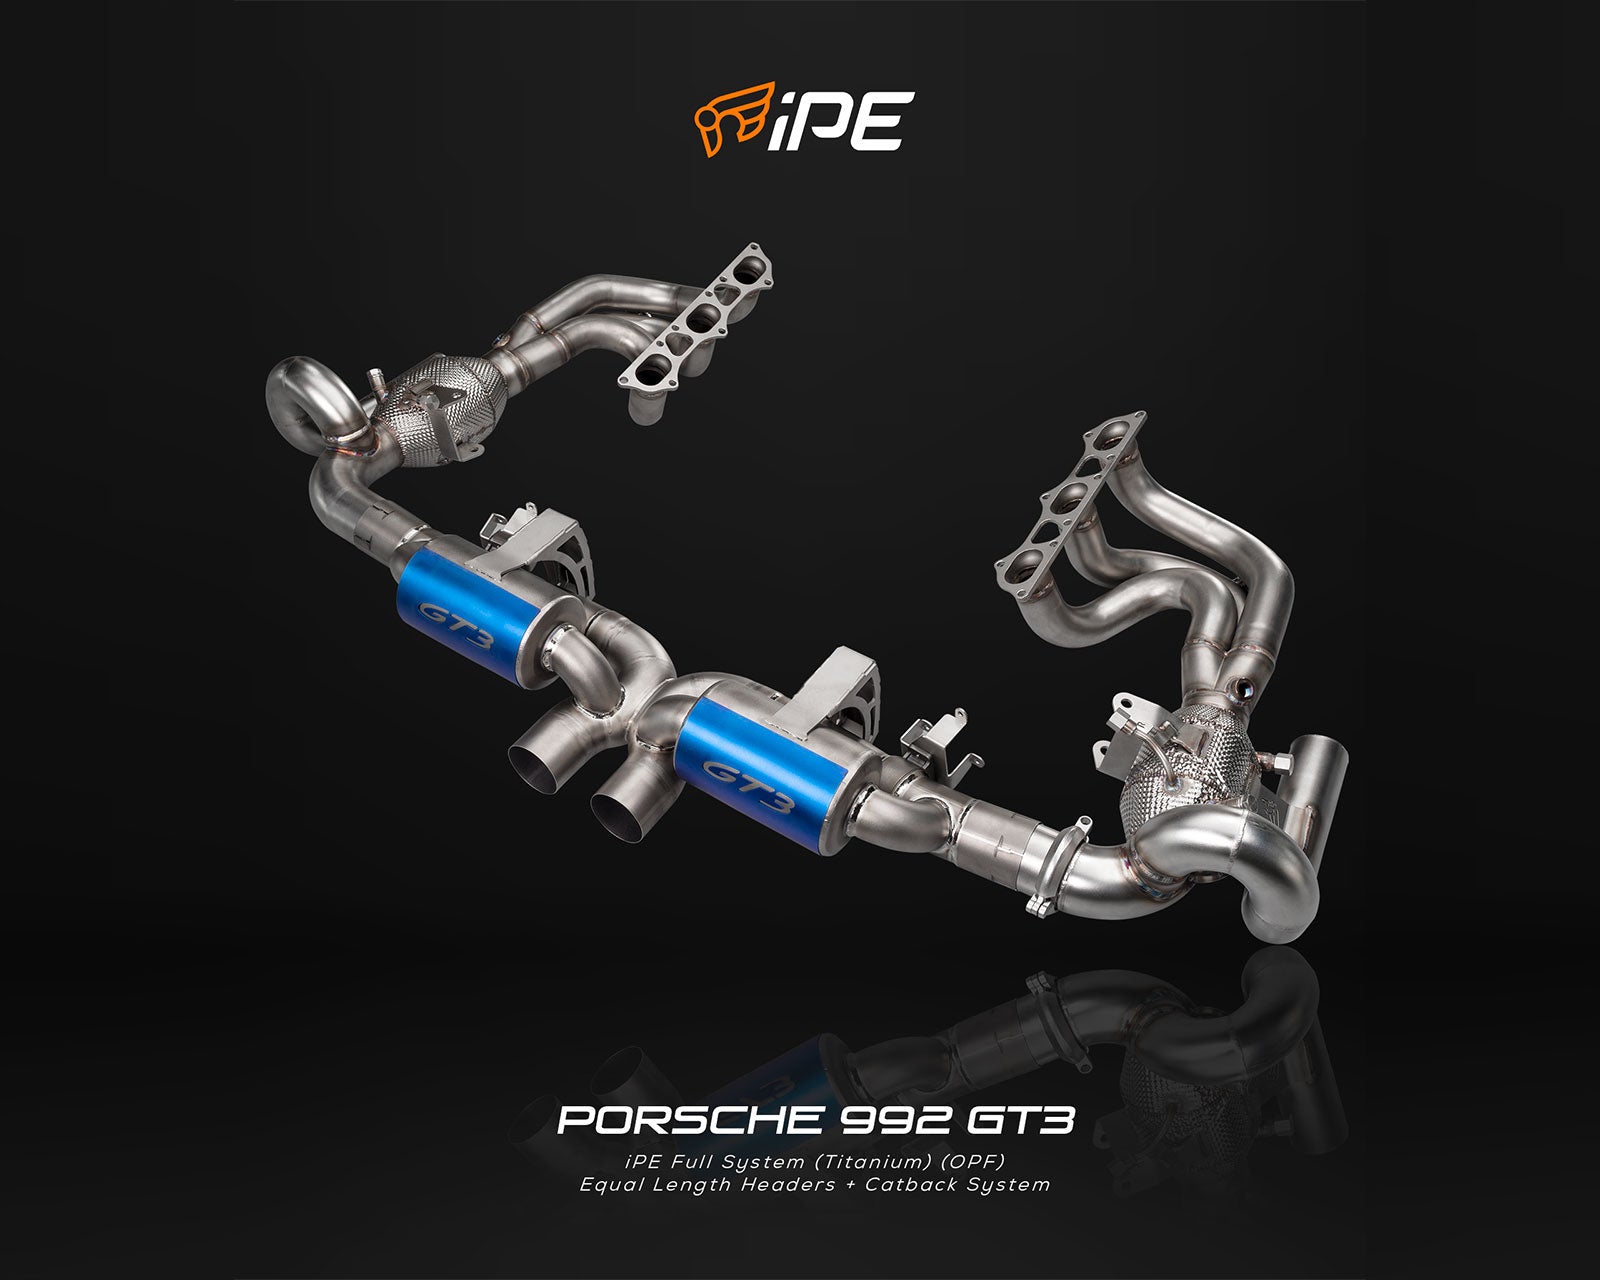 Exhaust Systems for Your Porsche 992 GT3